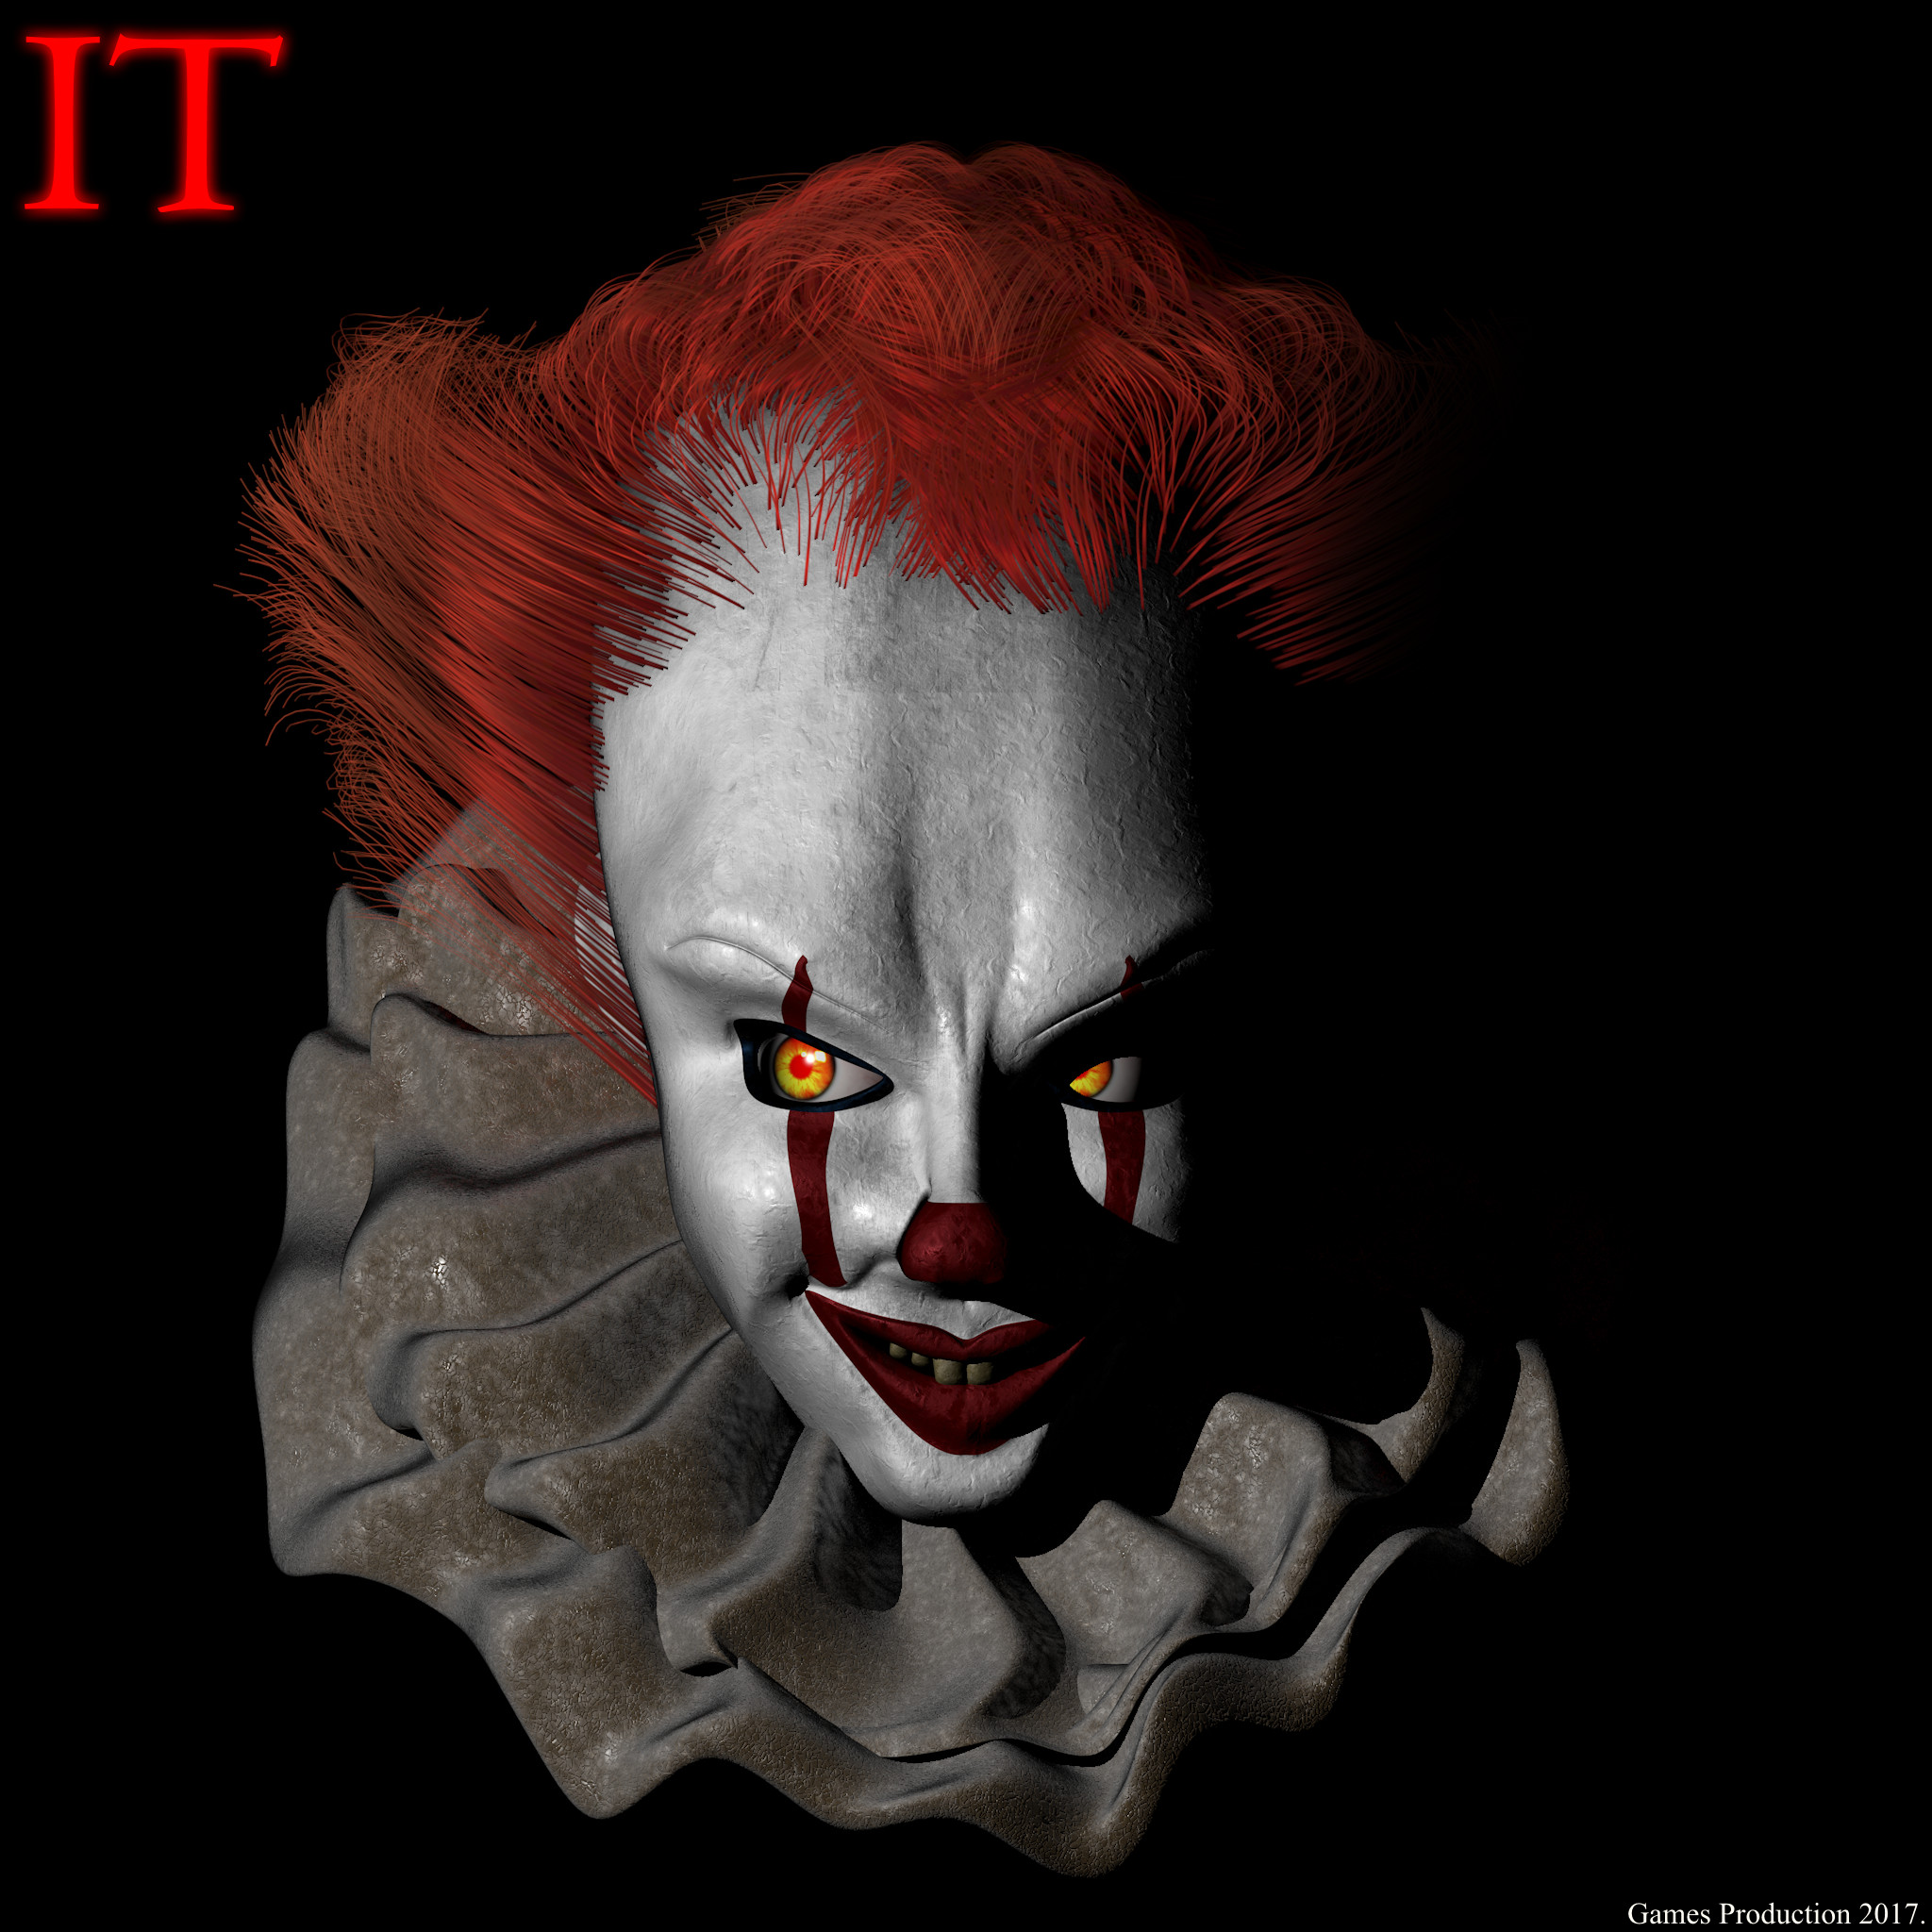 2048x2048 ... IT - Stylized Pennywise WIP by GamesProduction